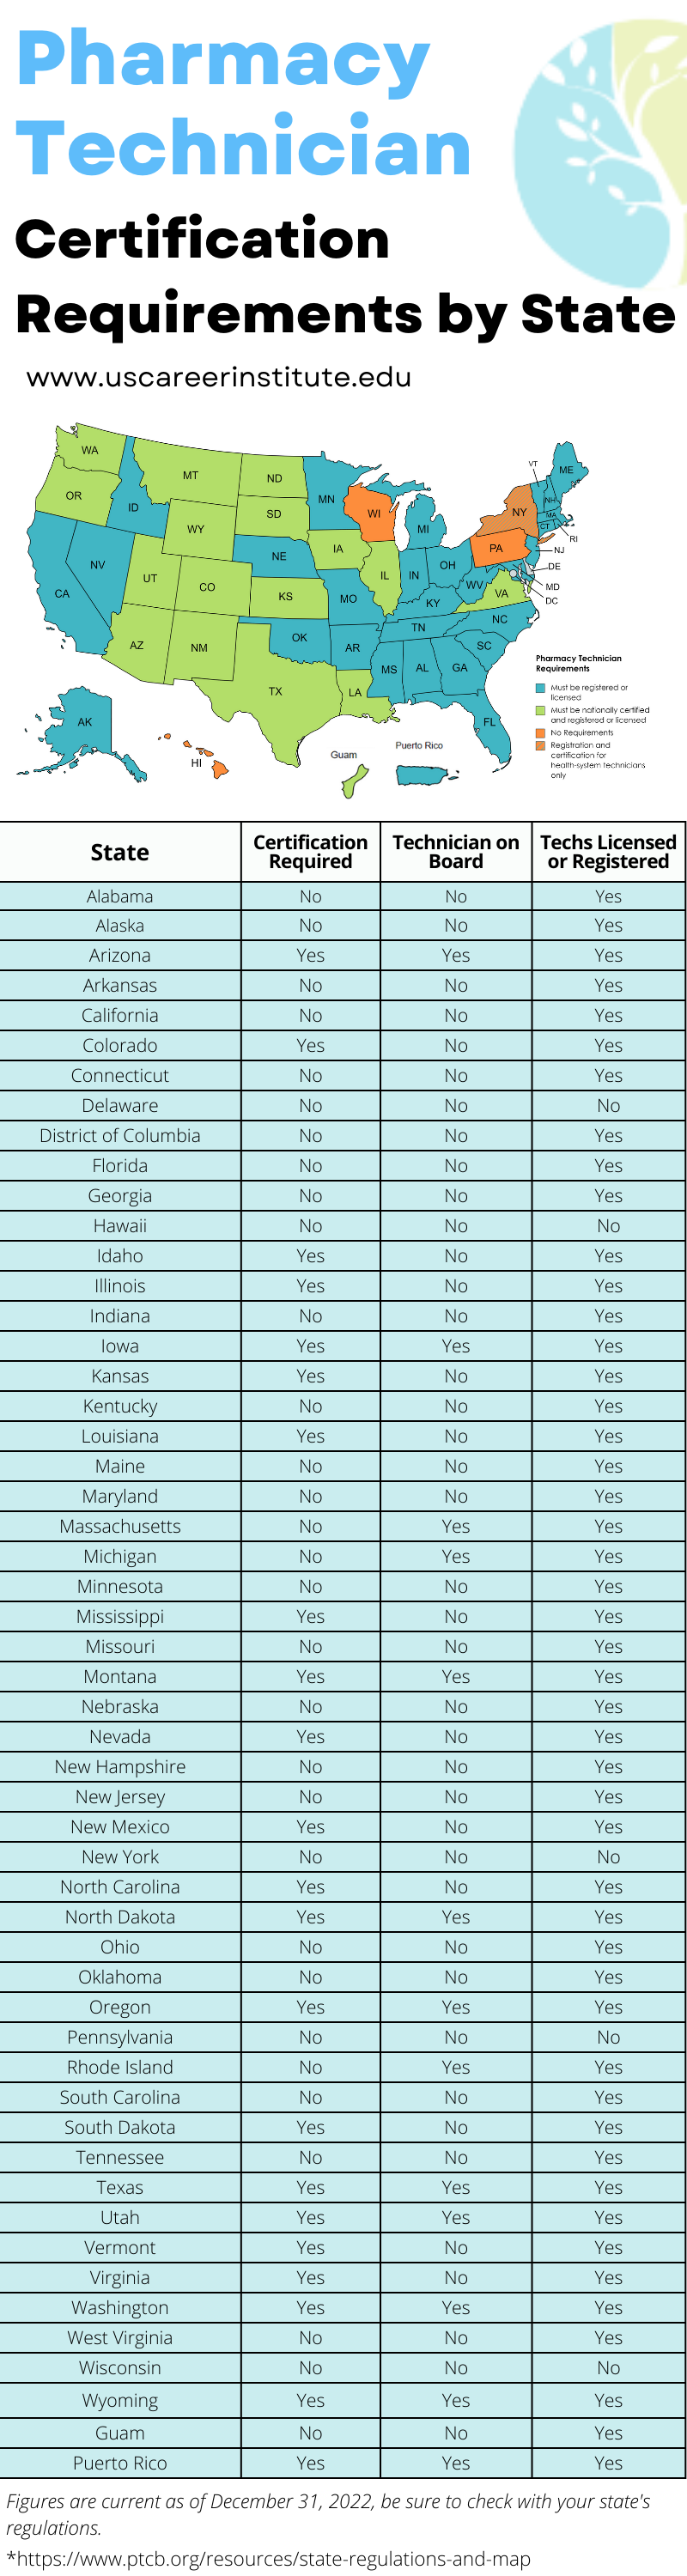 Pharmacy Technician Requirements by State 